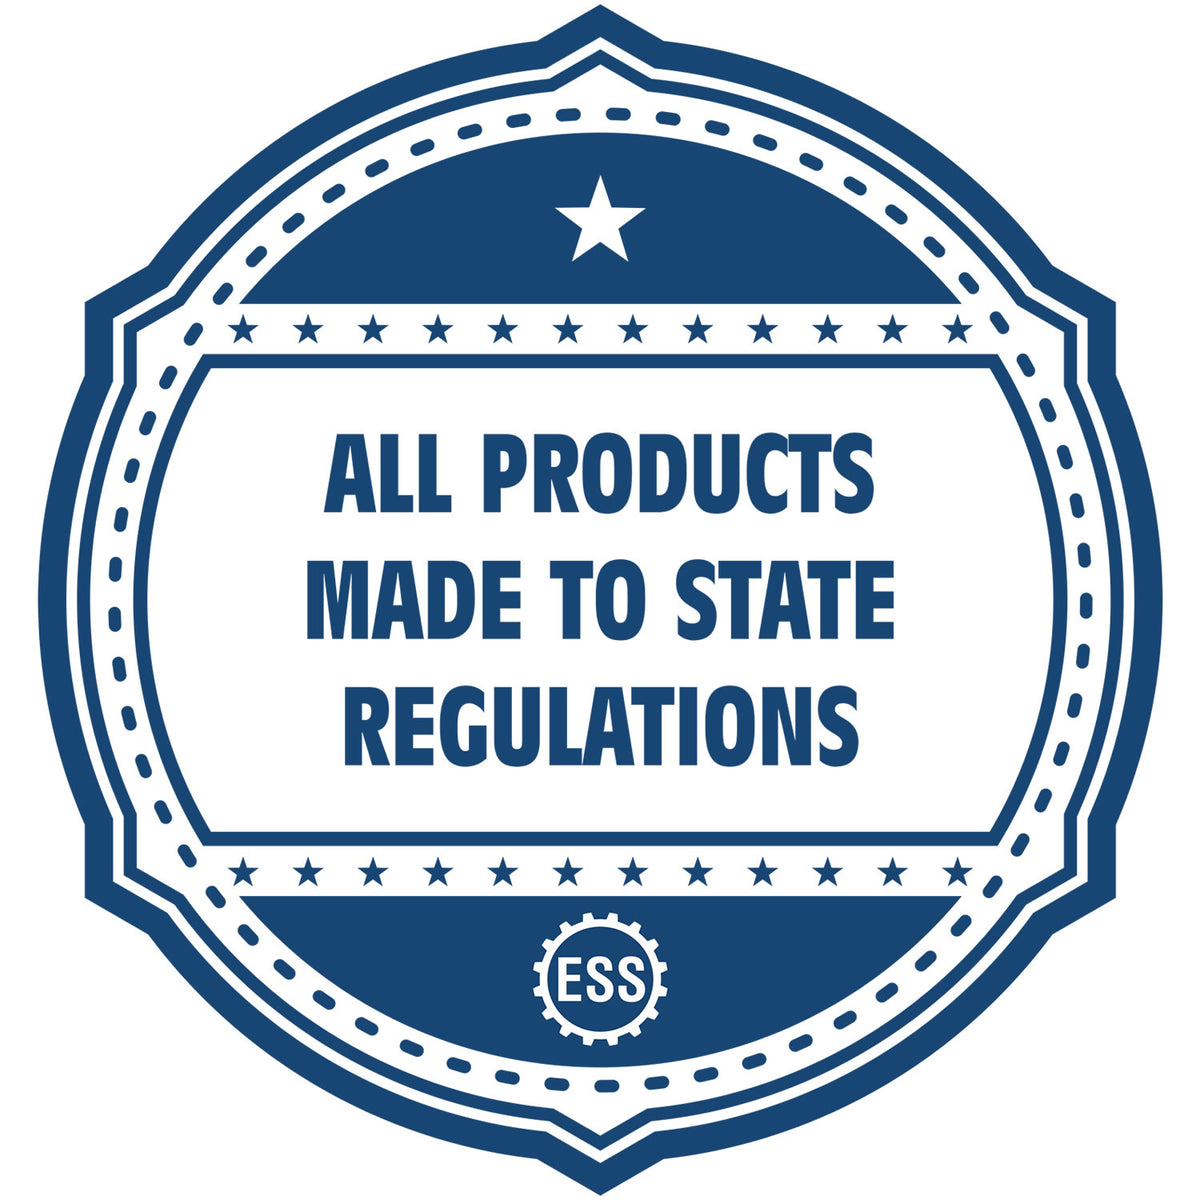 An icon or badge element for the MaxLight Premium Pre-Inked Oregon Rectangular Notarial Stamp showing that this product is made in compliance with state regulations.